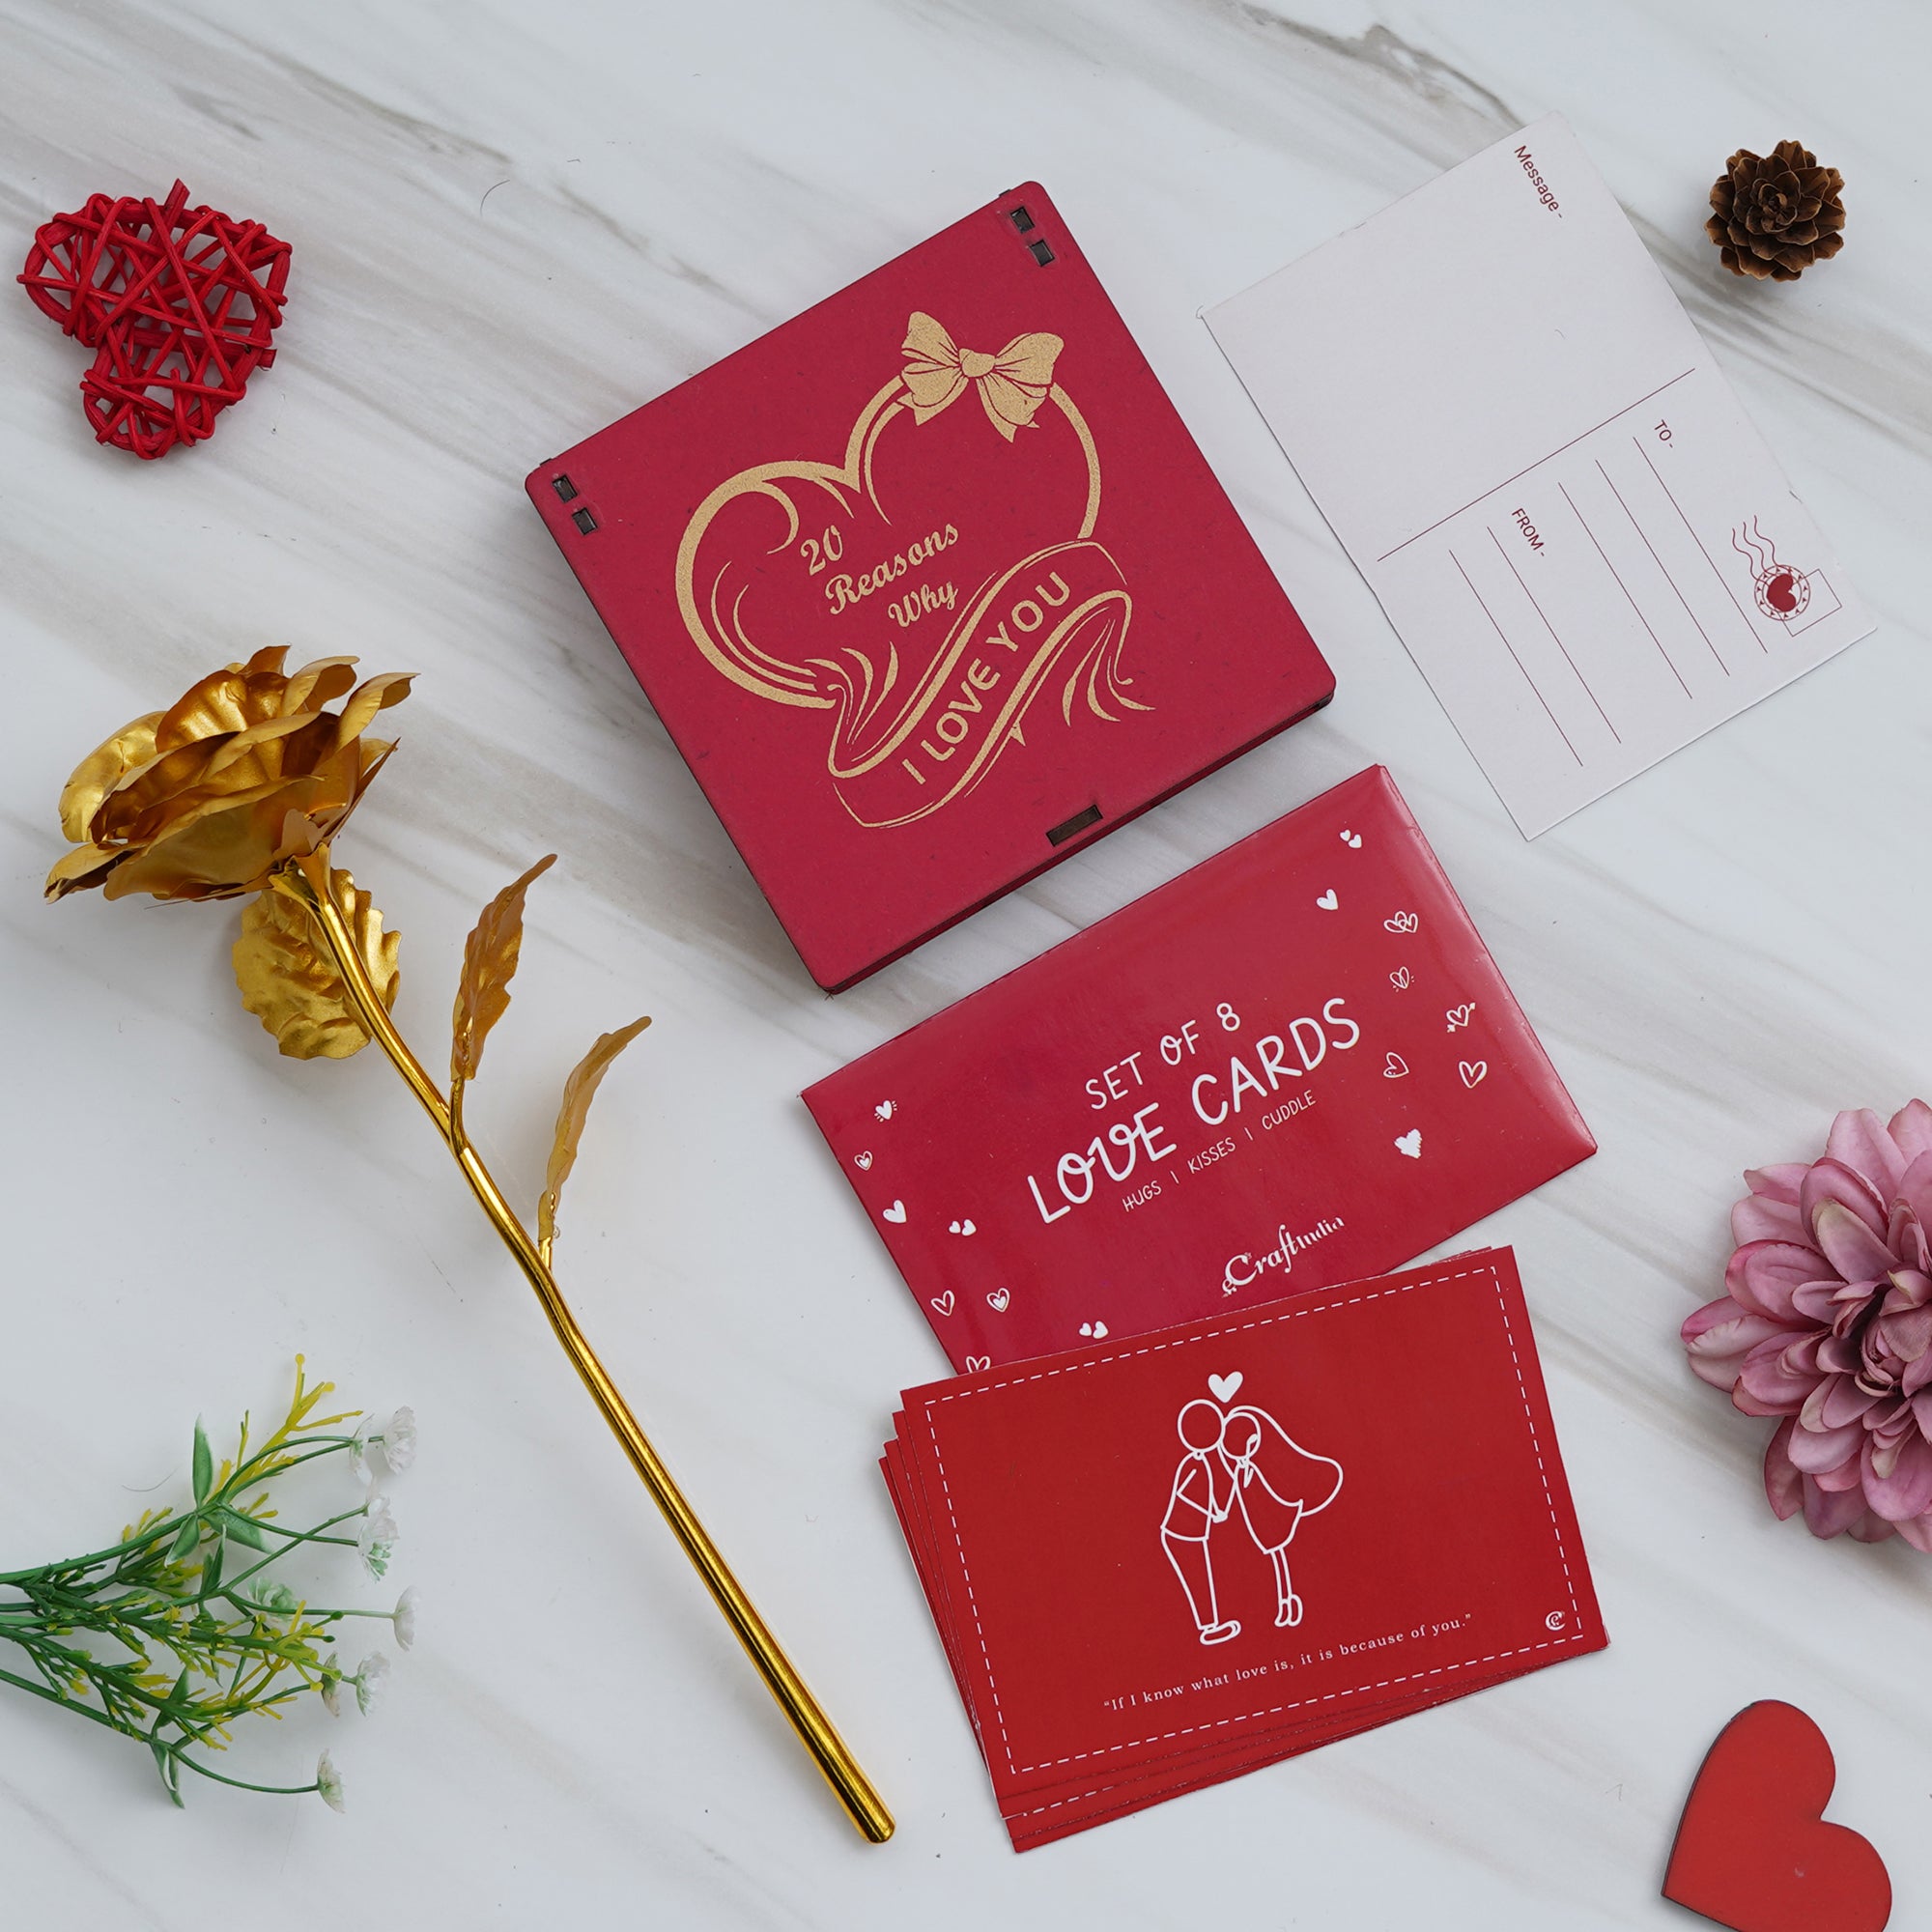 Valentine Combo of Pack of 8 Love Gift Cards, Golden Rose Gift Set, "20 Reasons Why I Love You" Printed on Little Red Hearts Decorative Wooden Gift Set Box